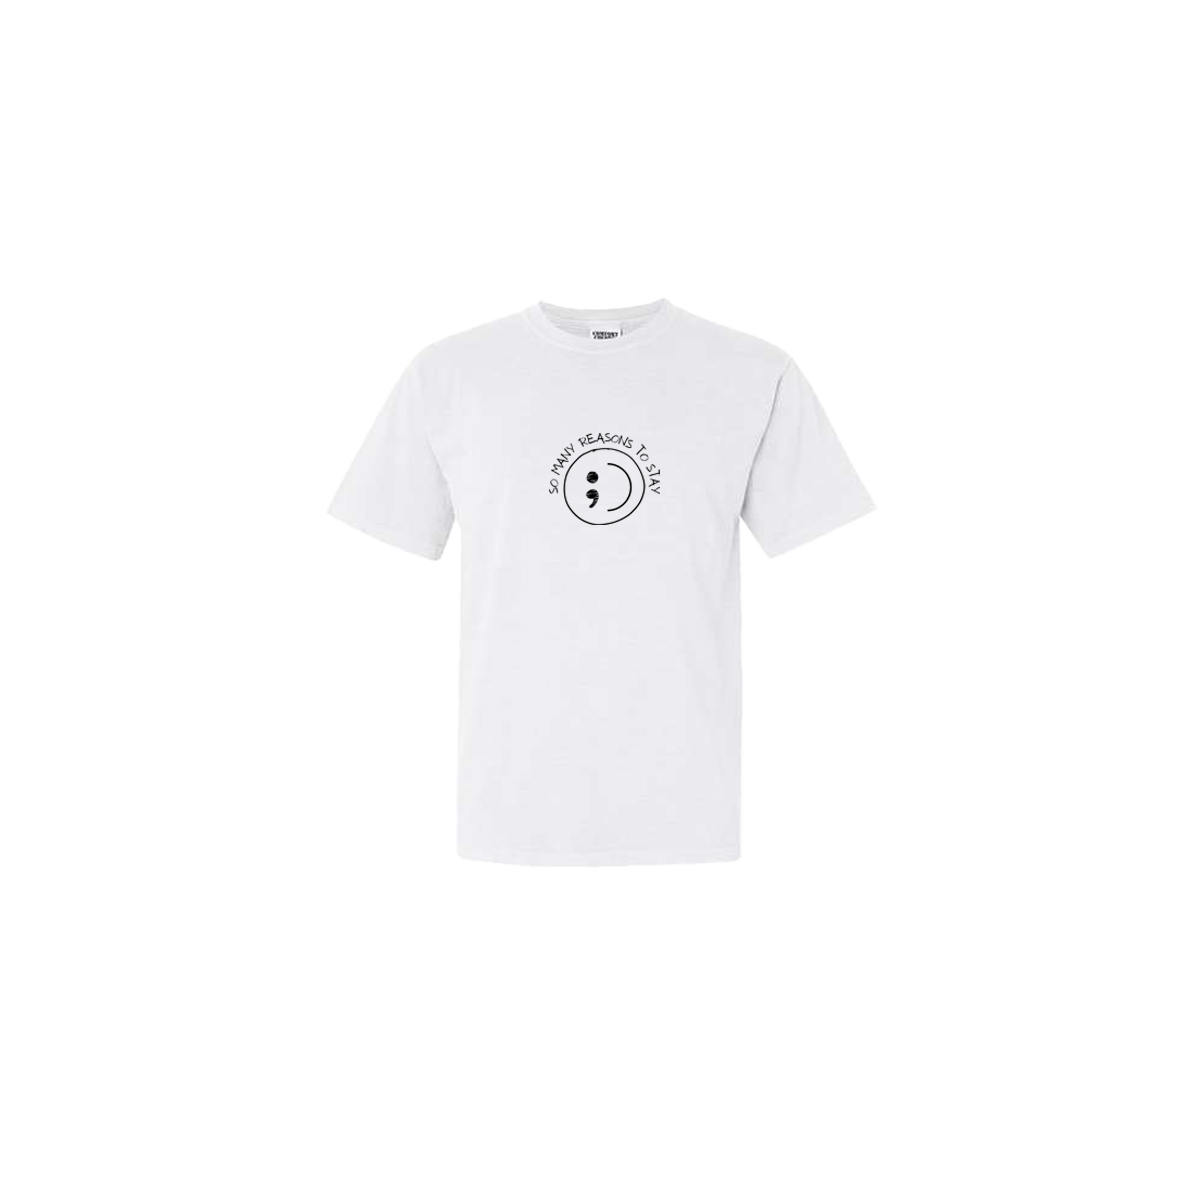 So Many Reasons to Stay Embroidered White Tshirt - Mental Health Awareness Clothing